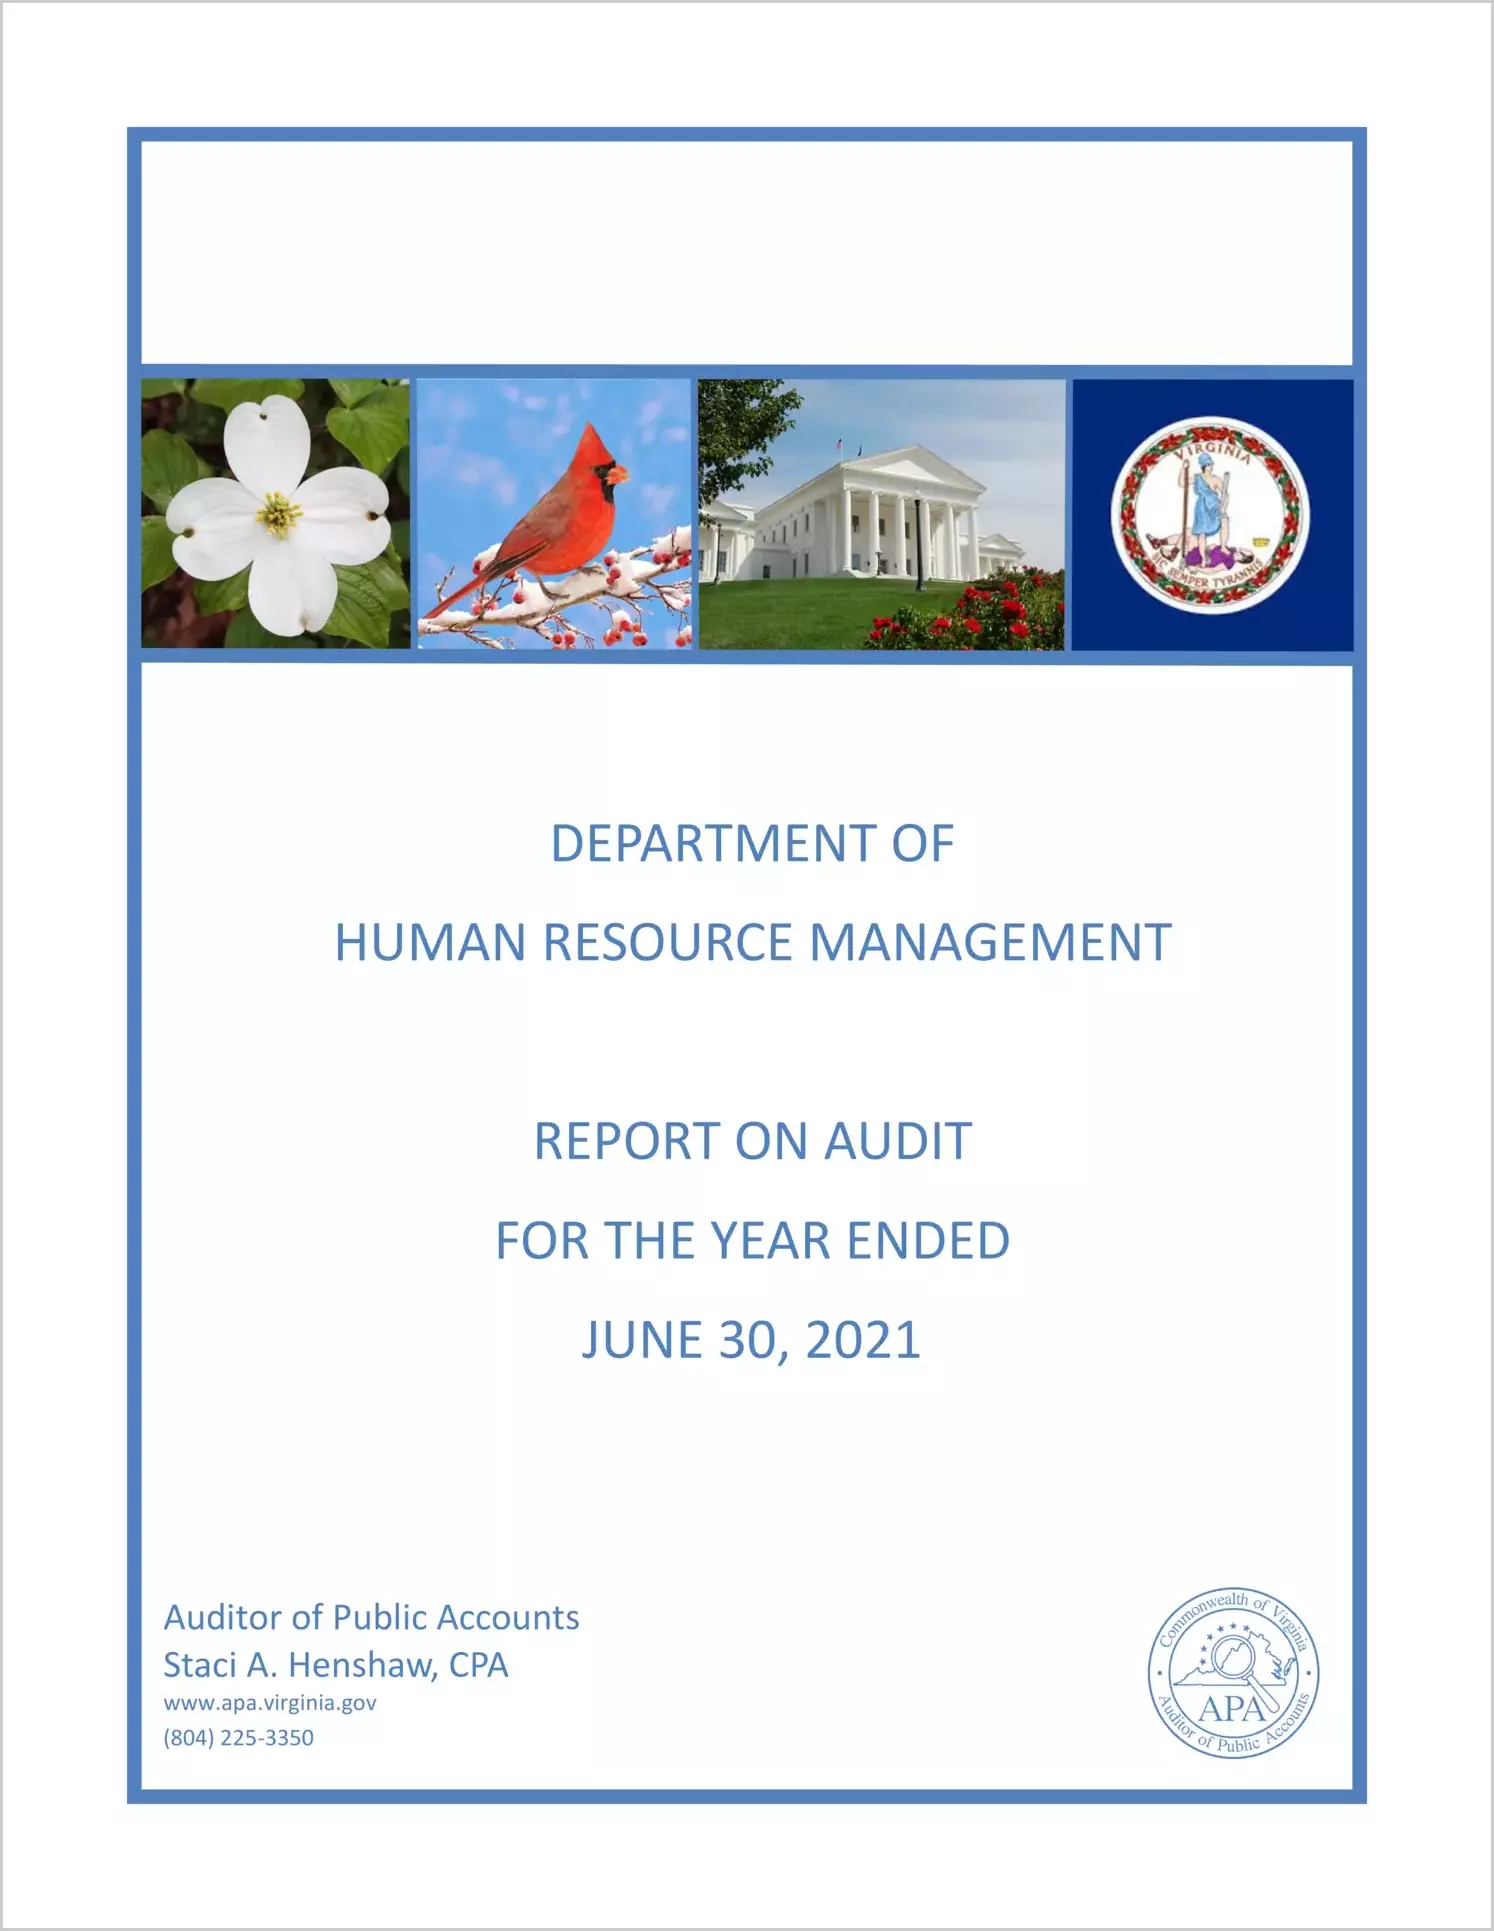 Department of Human Resource Management for the year ended June 30, 2021